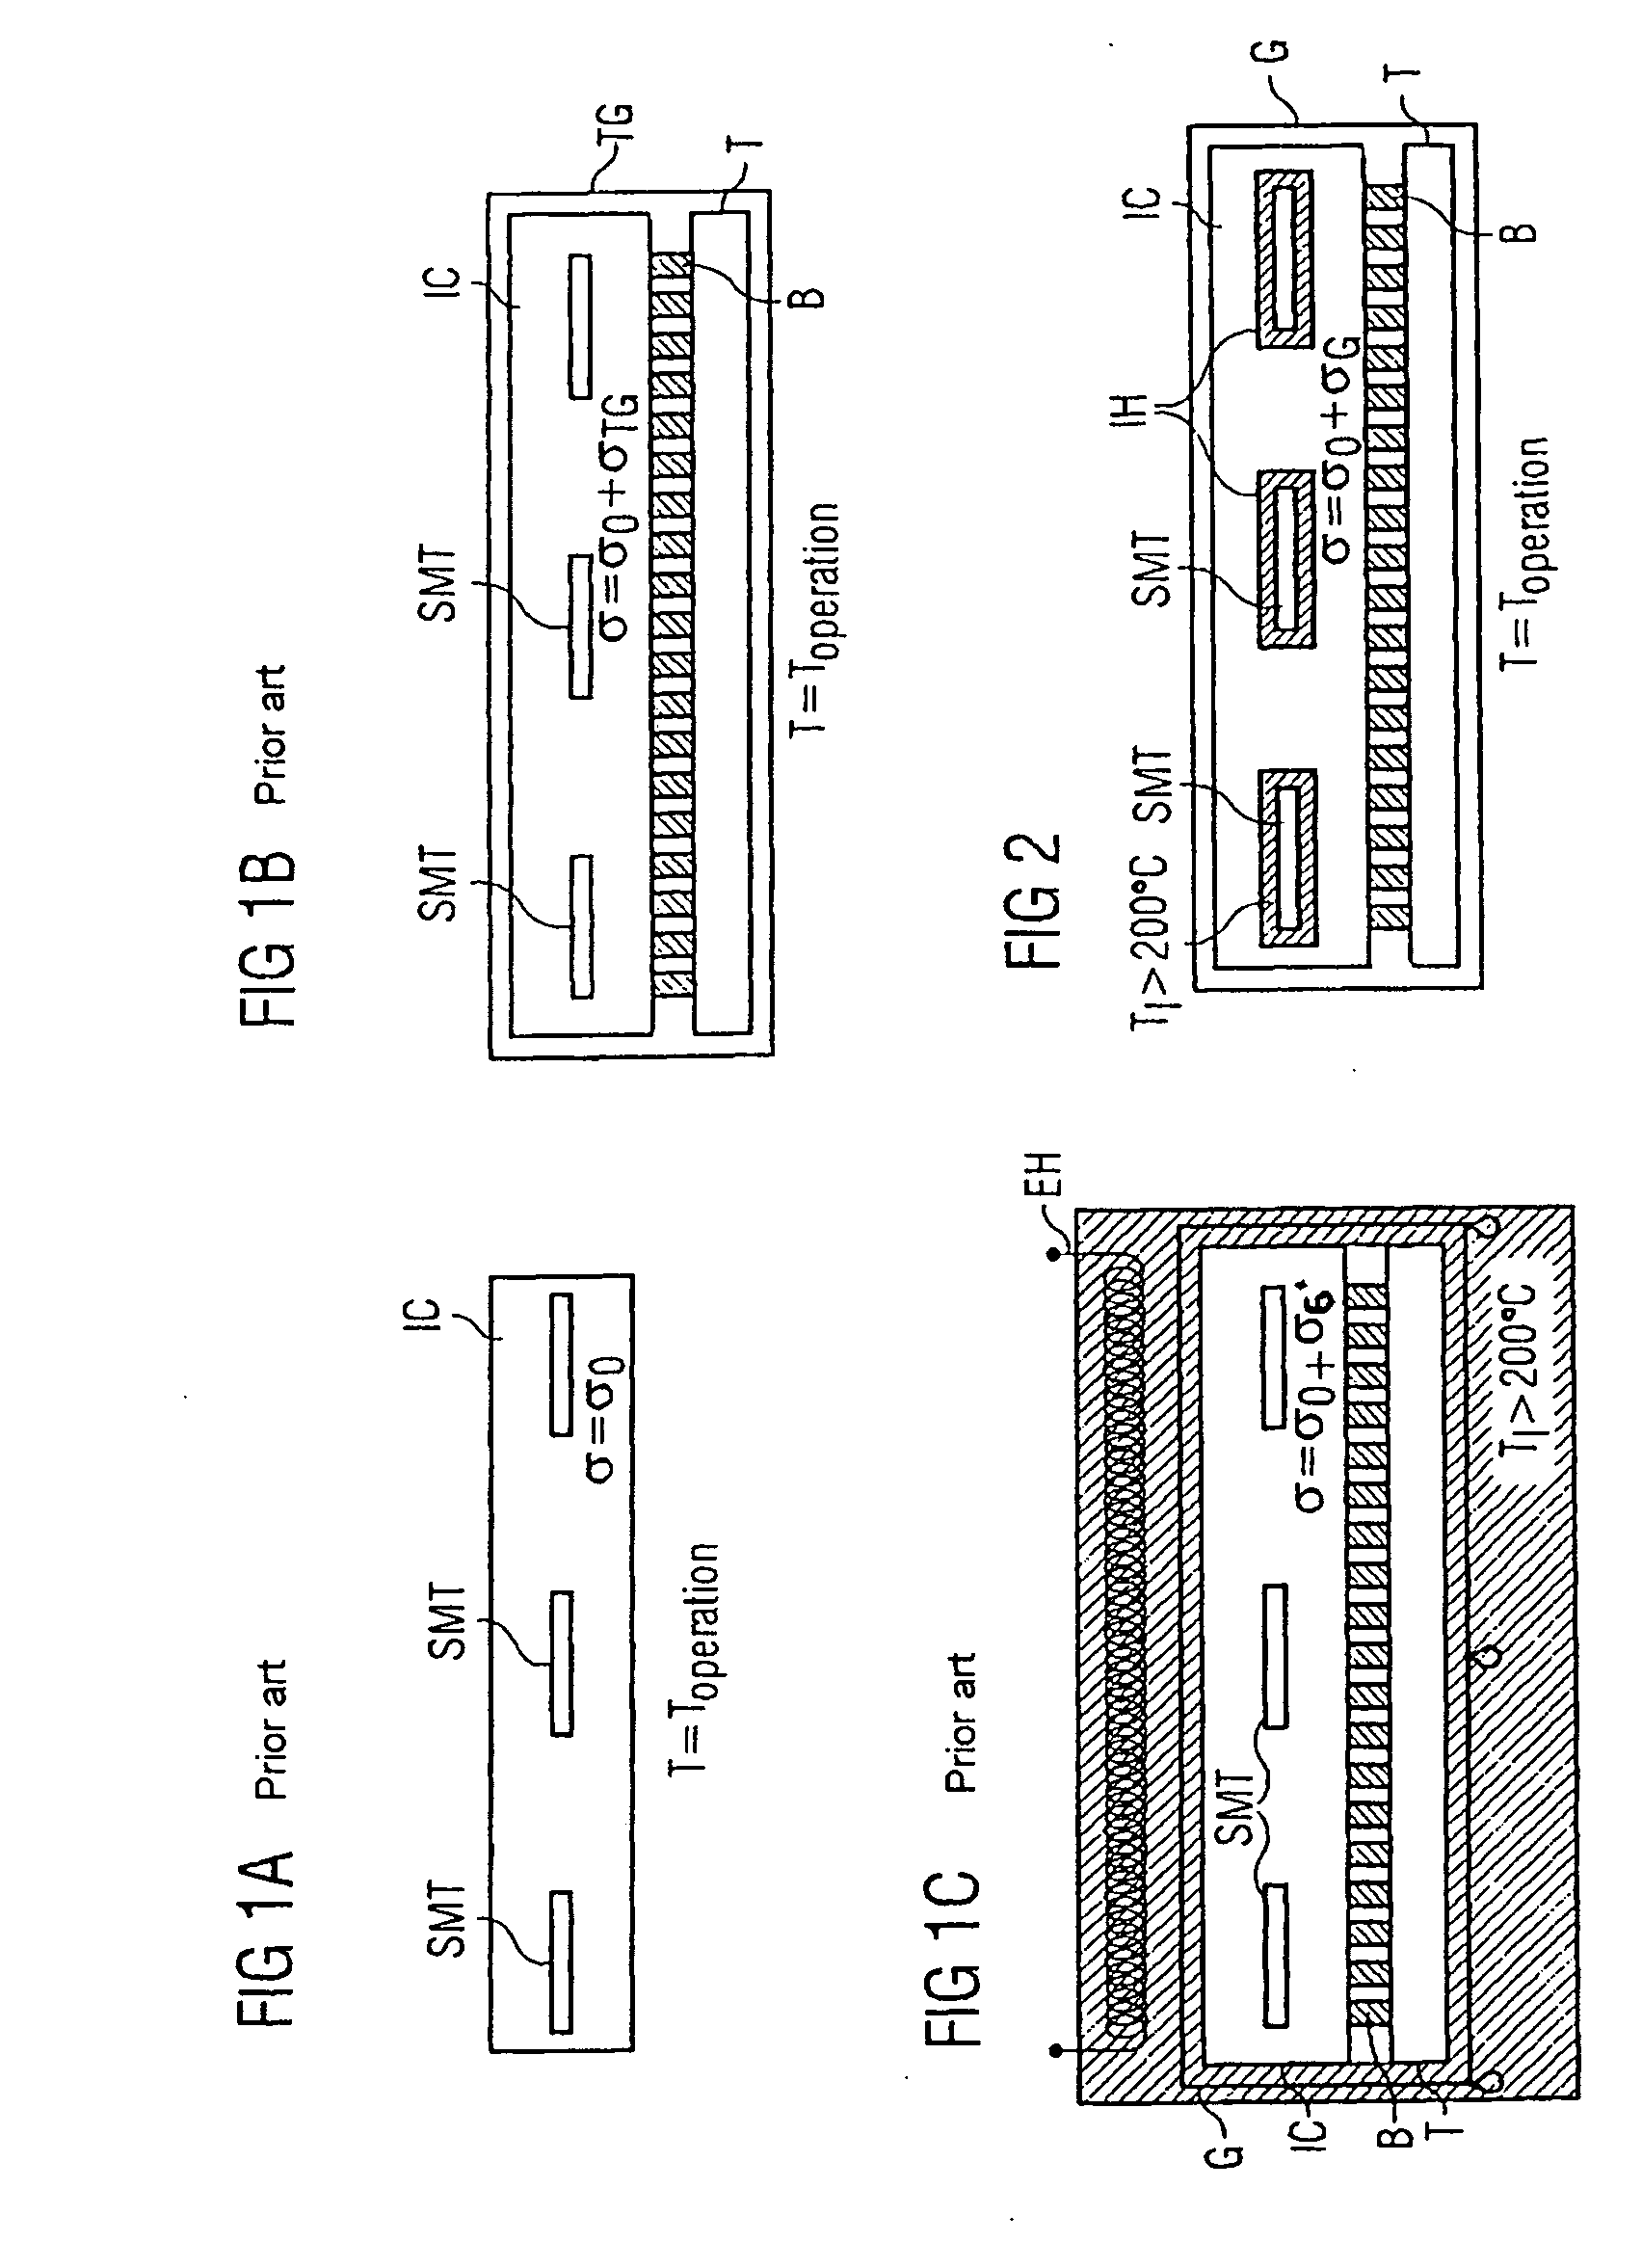 Device and method for detecting stress migration properties